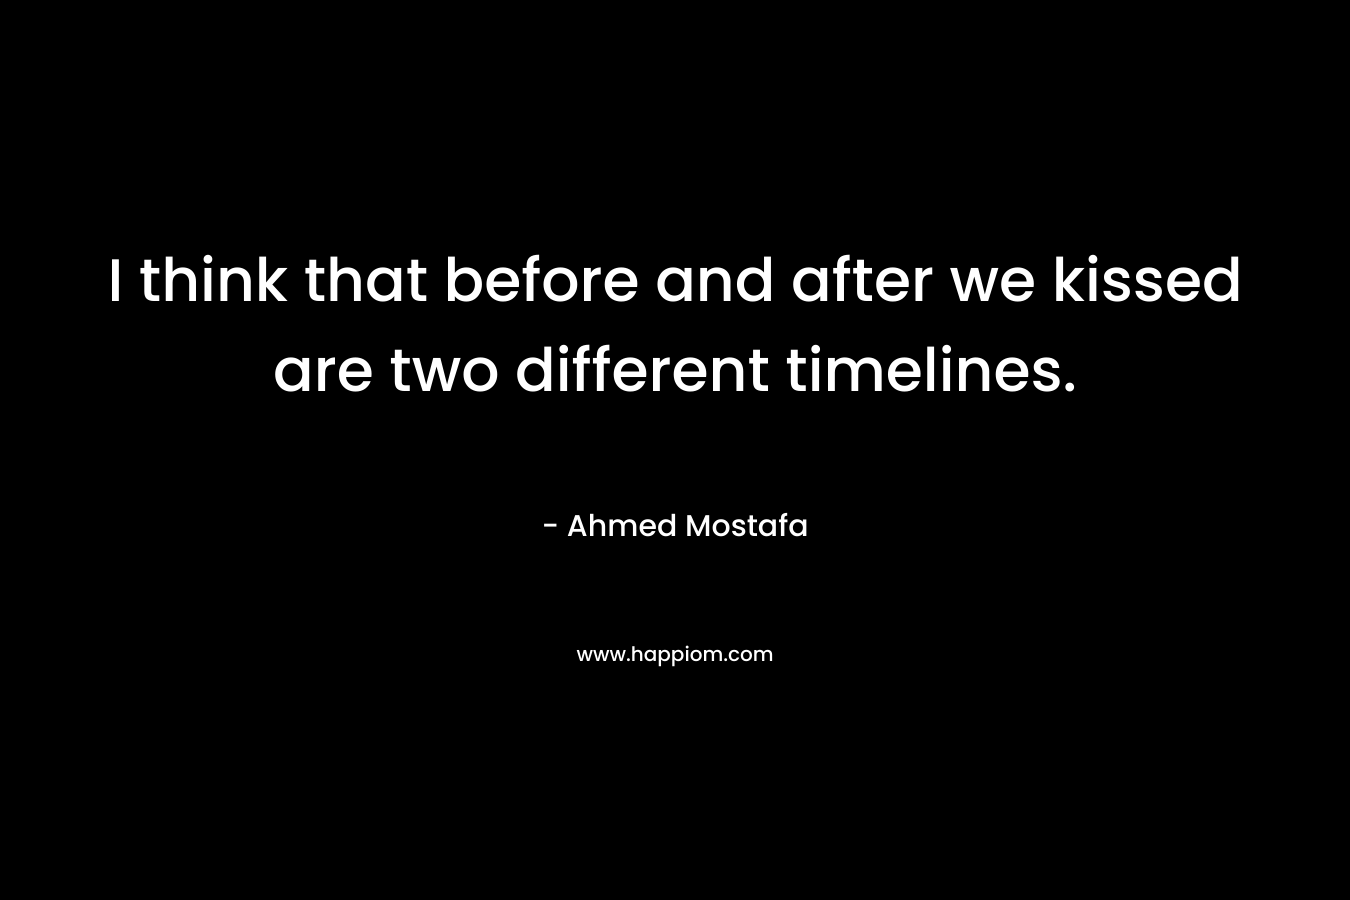 I think that before and after we kissed are two different timelines.